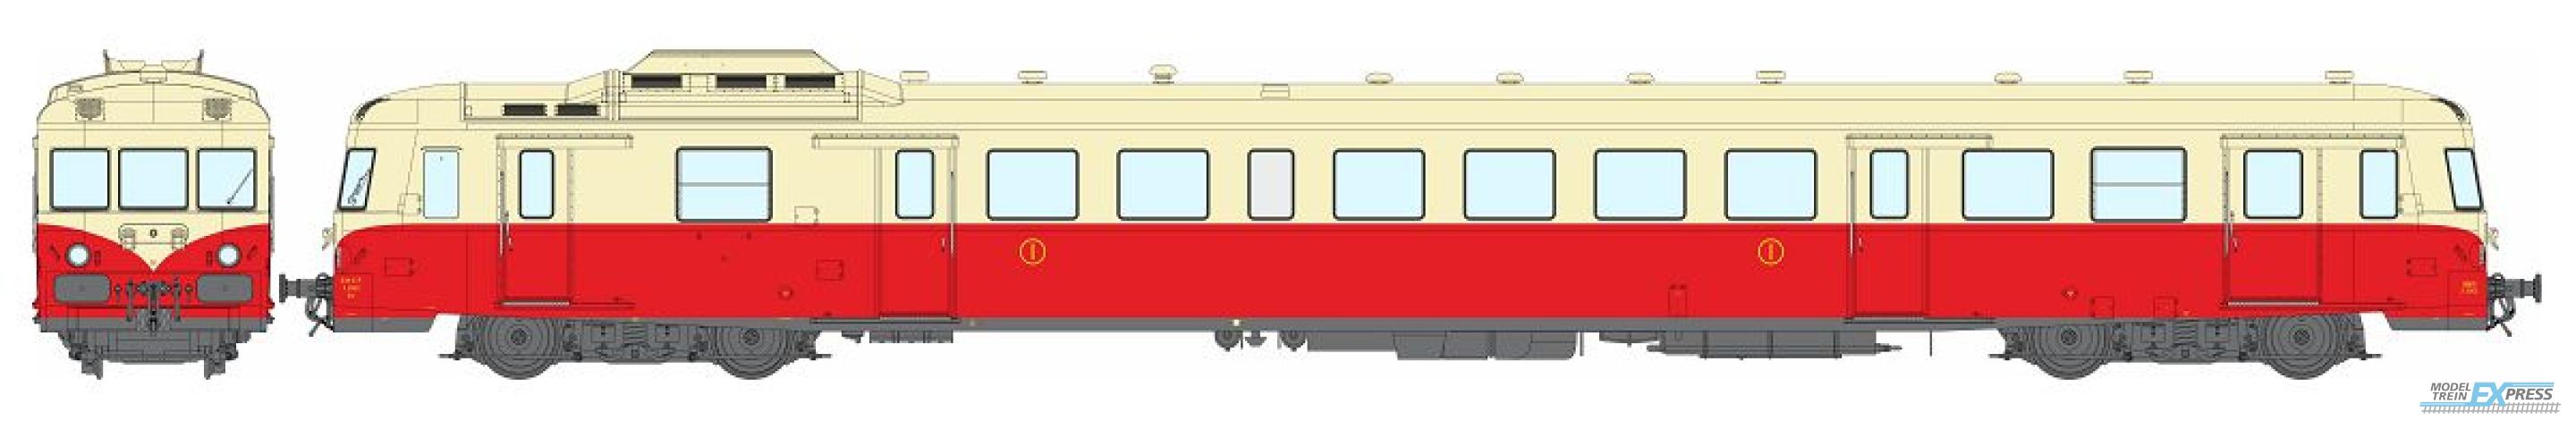 REE models MB-227SAC X 2902 with skirt, 1st class Origin, Red 605 and Cream 407, NANCY, SNCF Era.III - AC Sound Functional Pantos (3 tracks)